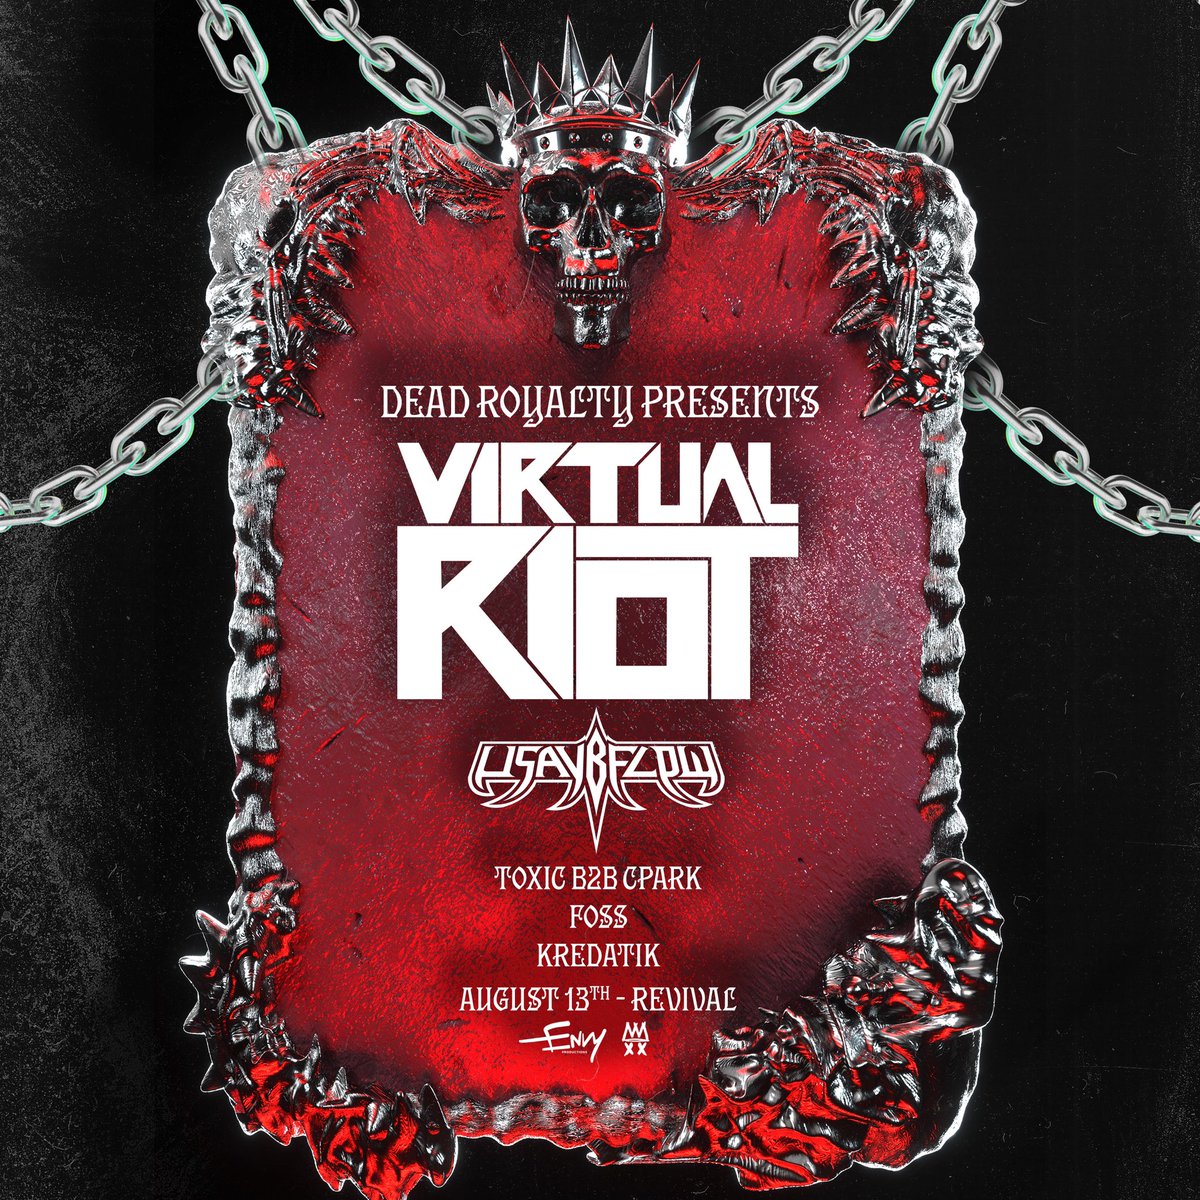 For all of you that were looking forward to some heavy bass music next weekend, this one’s for you. We’re proud to announce @Virtual_Riot at Revival next Saturday Aug 13th with @uSAYbFLOW, @itstoxicmusic b2b @whoisCPARK, @IAMFOSS, & Kredatik 💀👑